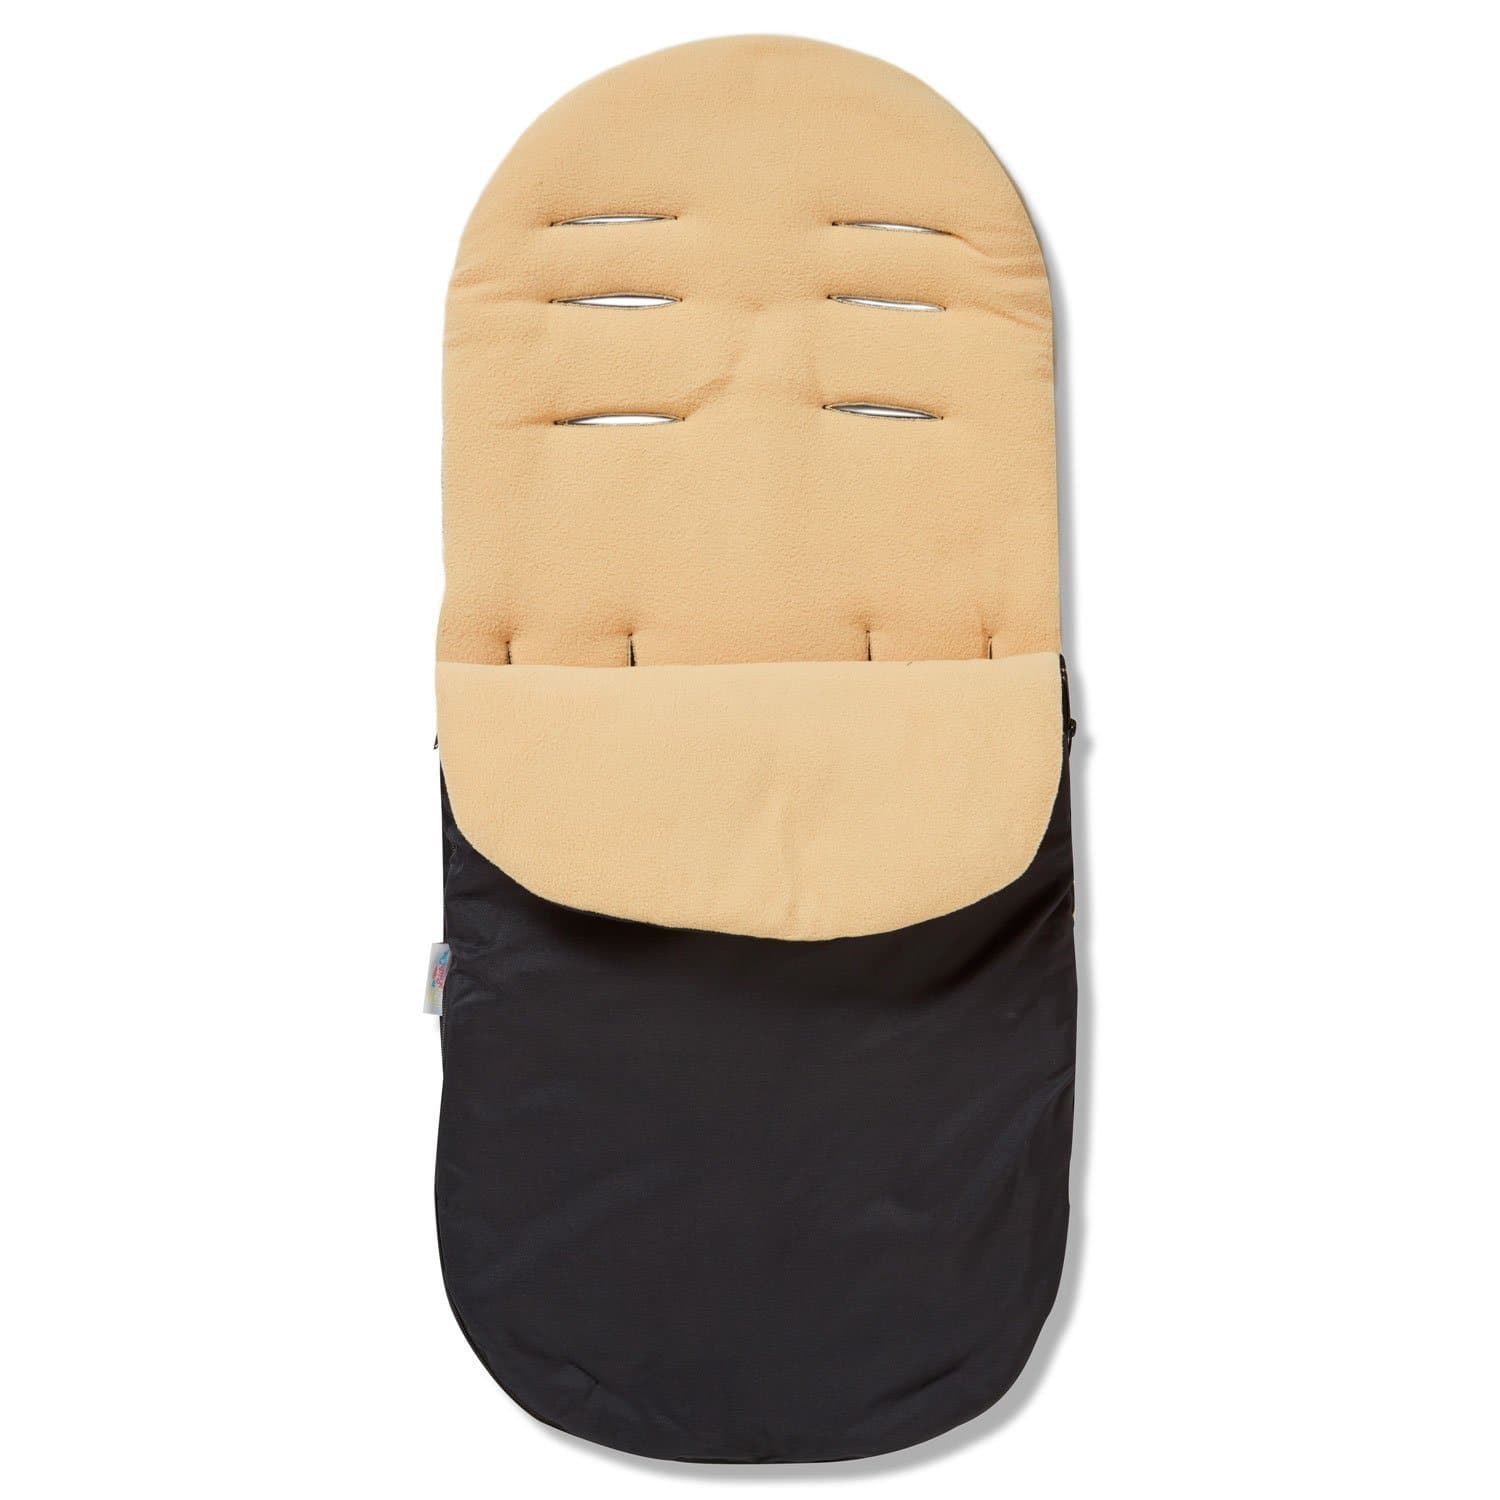 Footmuff / Cosy Toes Compatible with Zeta - Sand / Fits All Models | For Your Little One